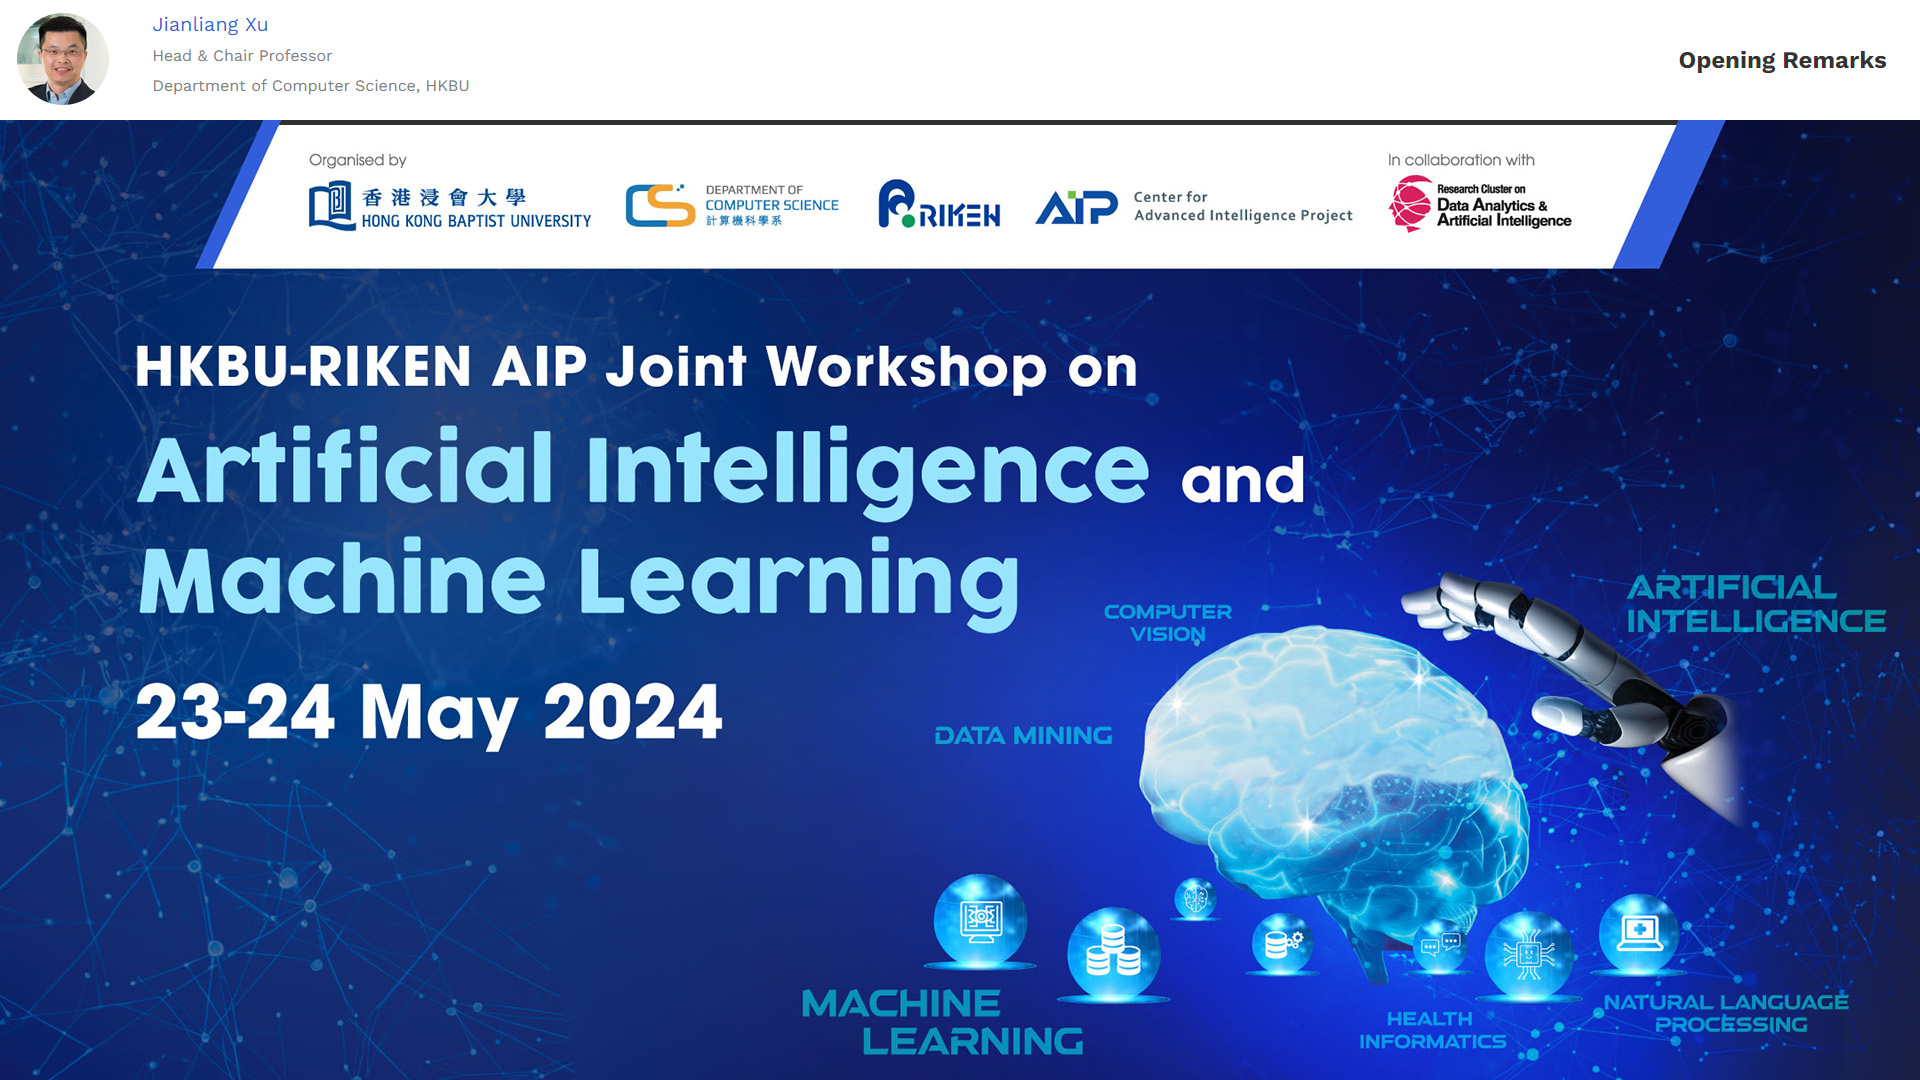 HKBU-RIKEN AIP Joint Workshop on Artificial Intelligence and Machine Learning - Opening Remarks